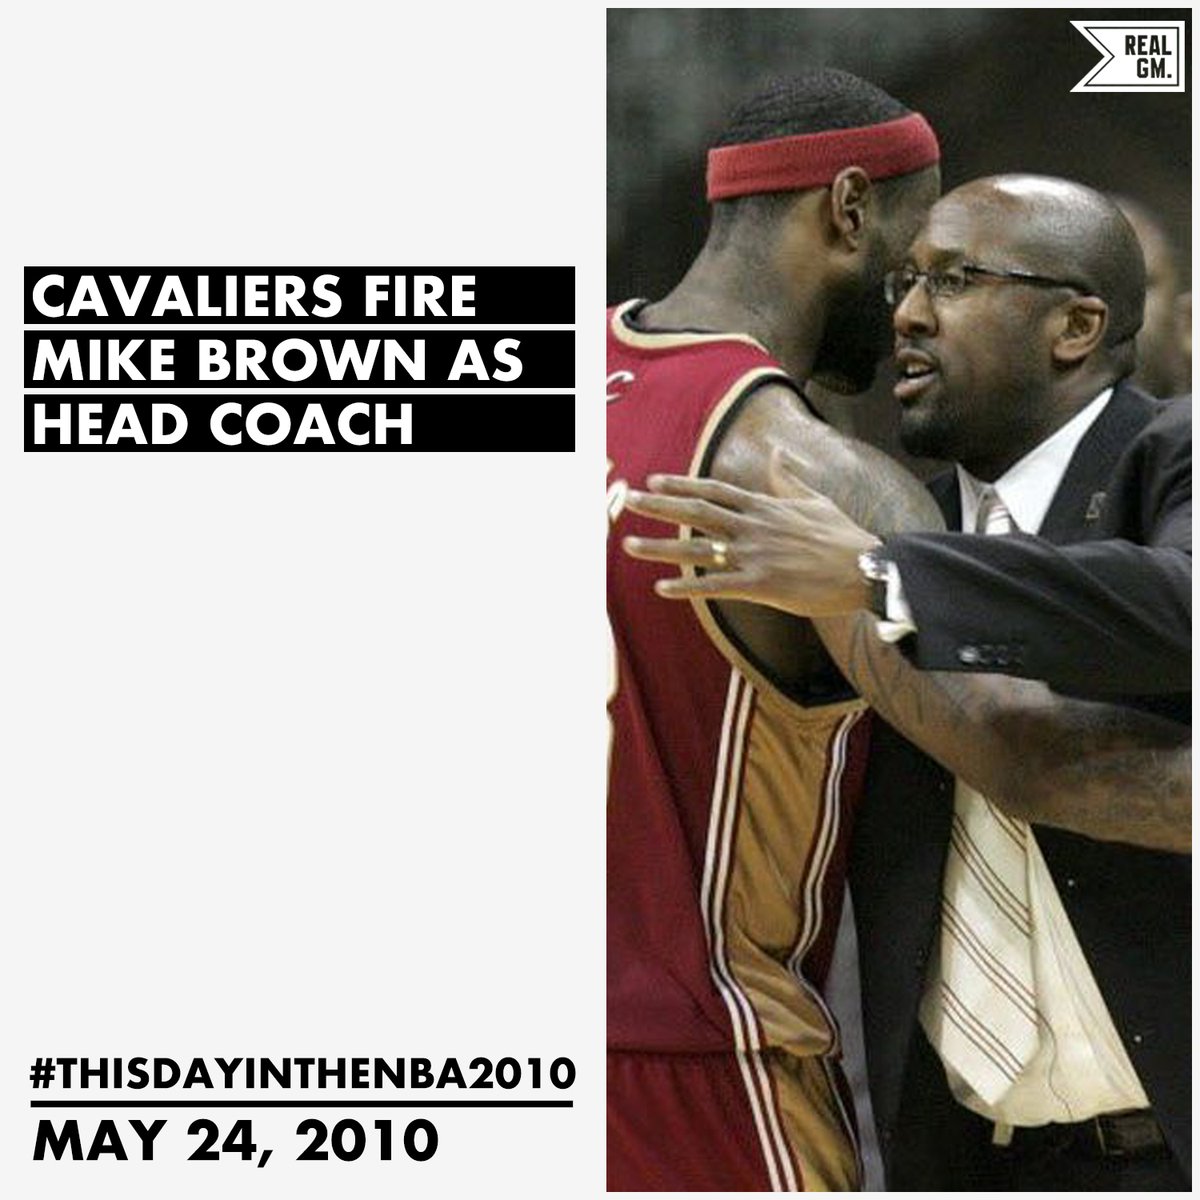  #ThisDayInTheNBA2010May 24, 2010Cavaliers Fire Mike Brown https://basketball.realgm.com/wiretap/204087/Cavaliers-Fire-Mike-Brown